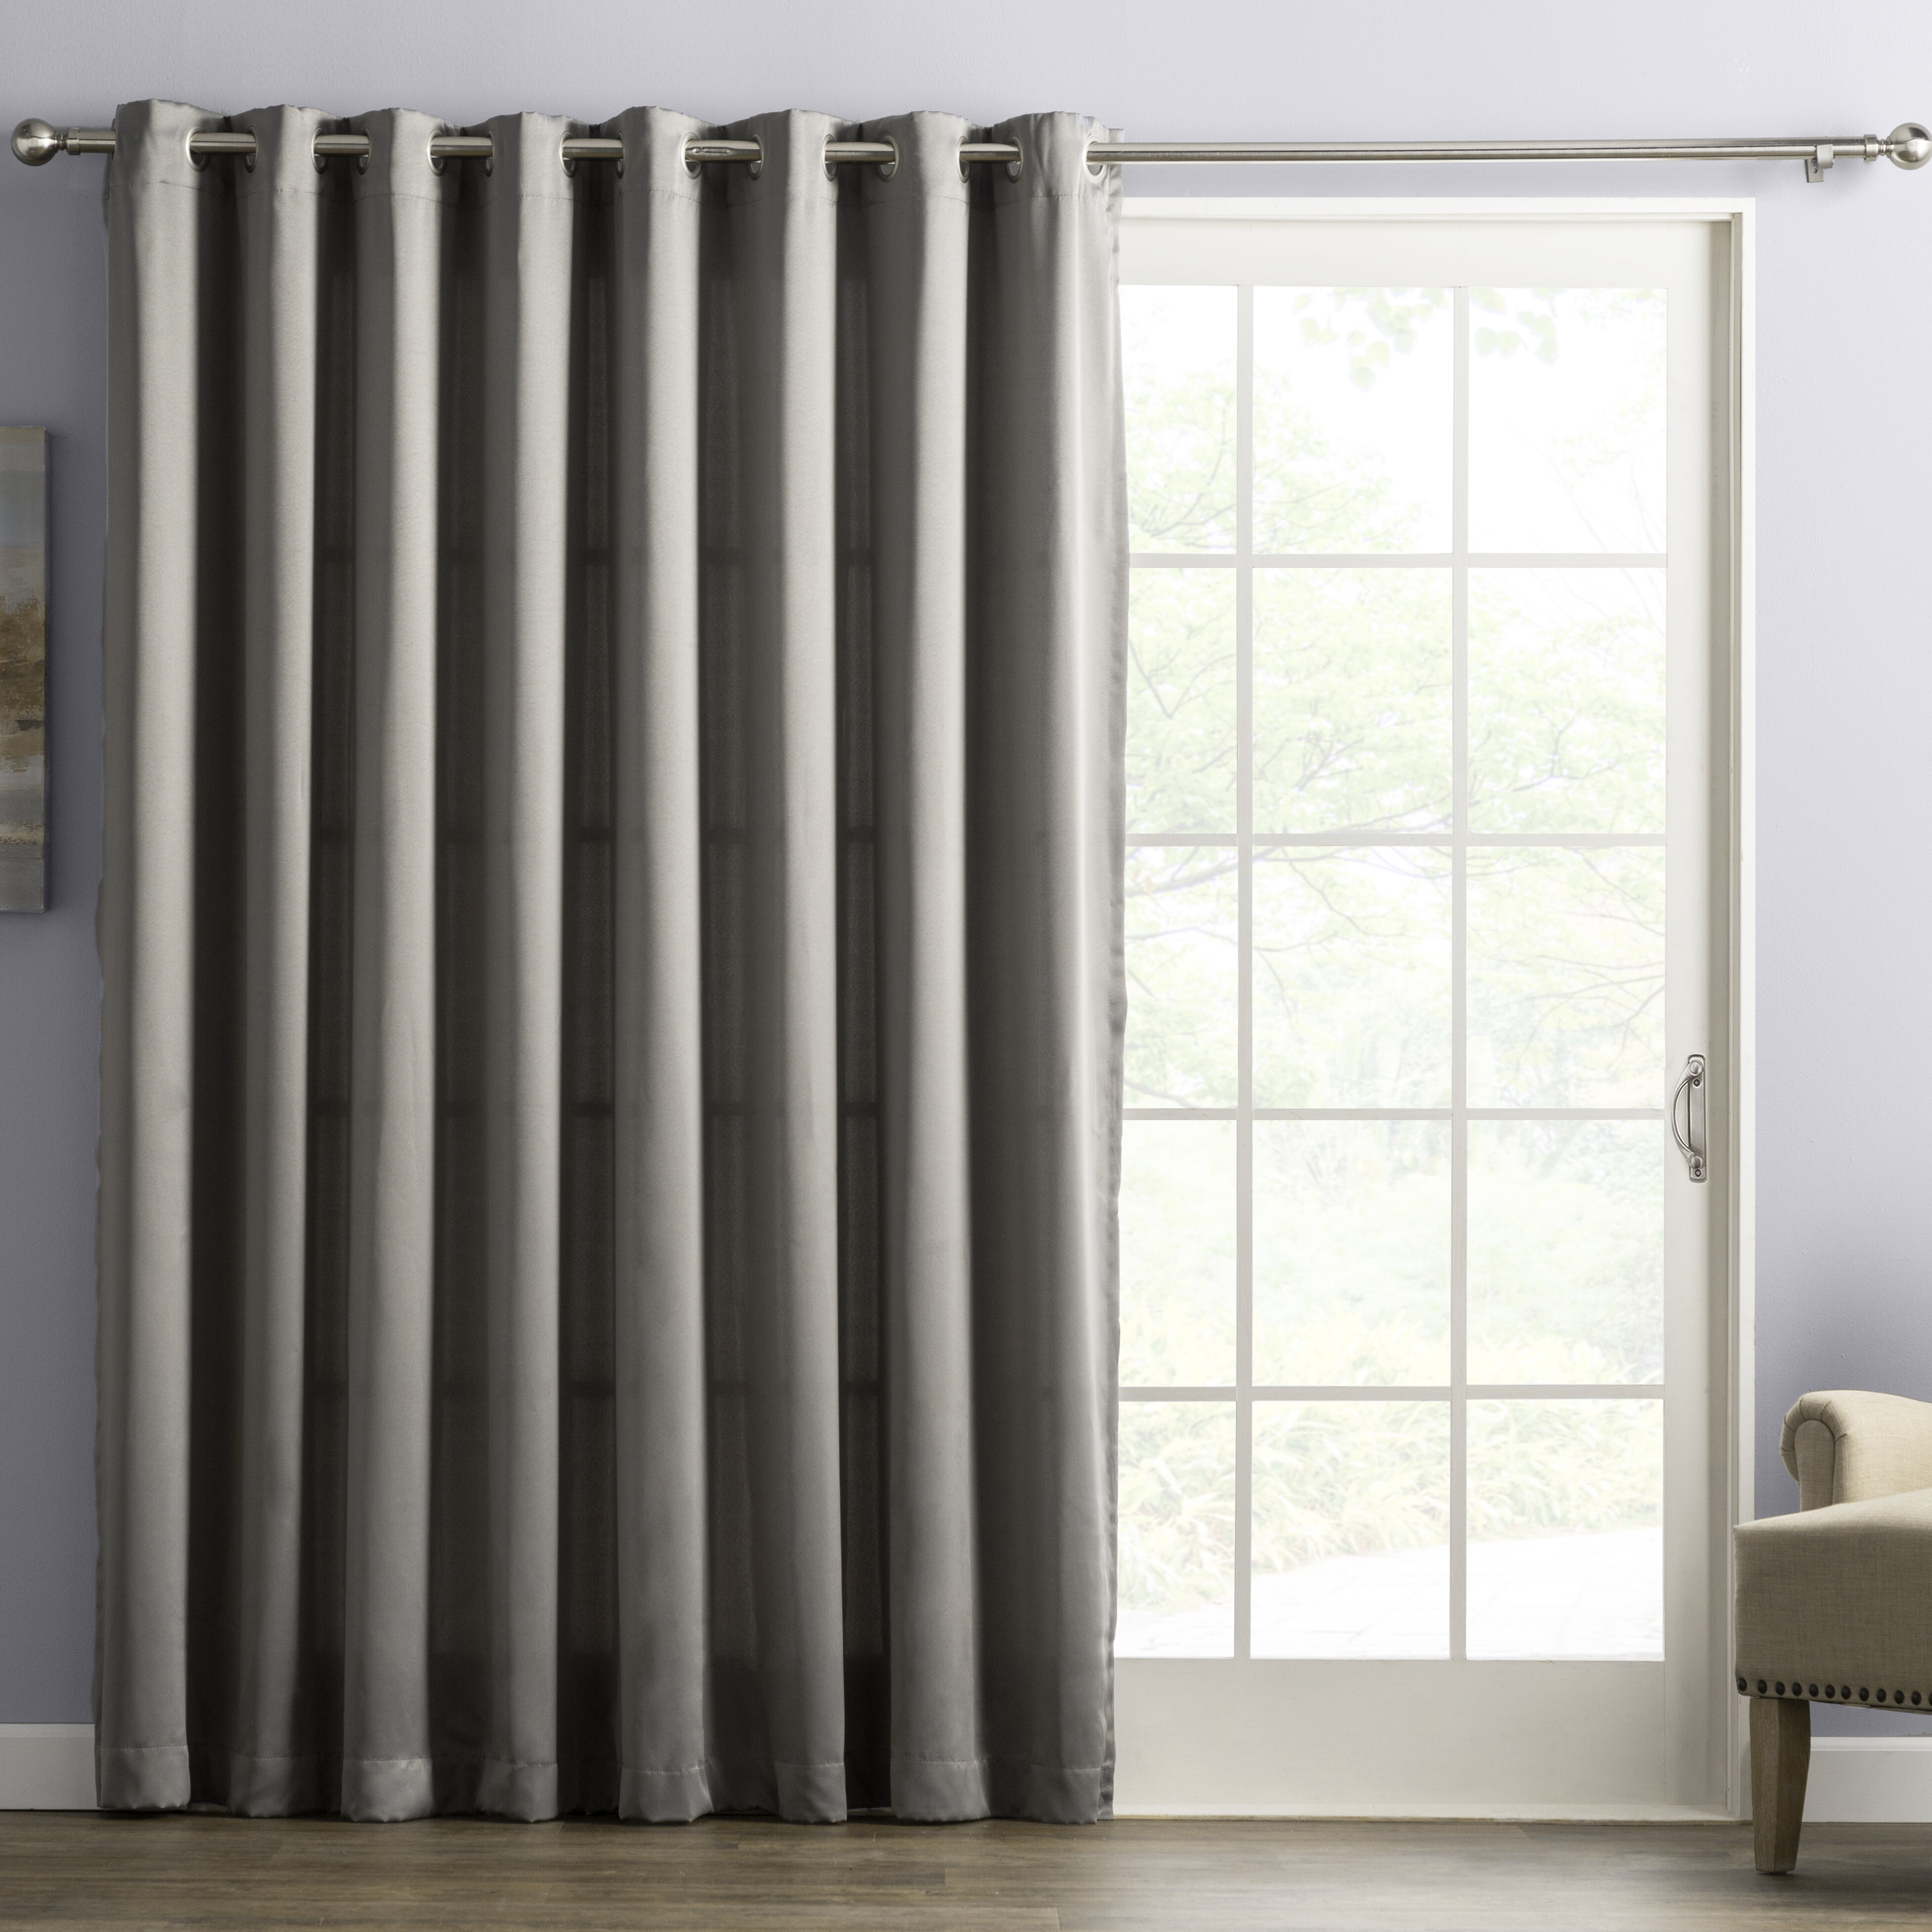 New-Opened  Silk Home Blackout Curtains 2 Panels Everly Charcoal 52 W x 84 L